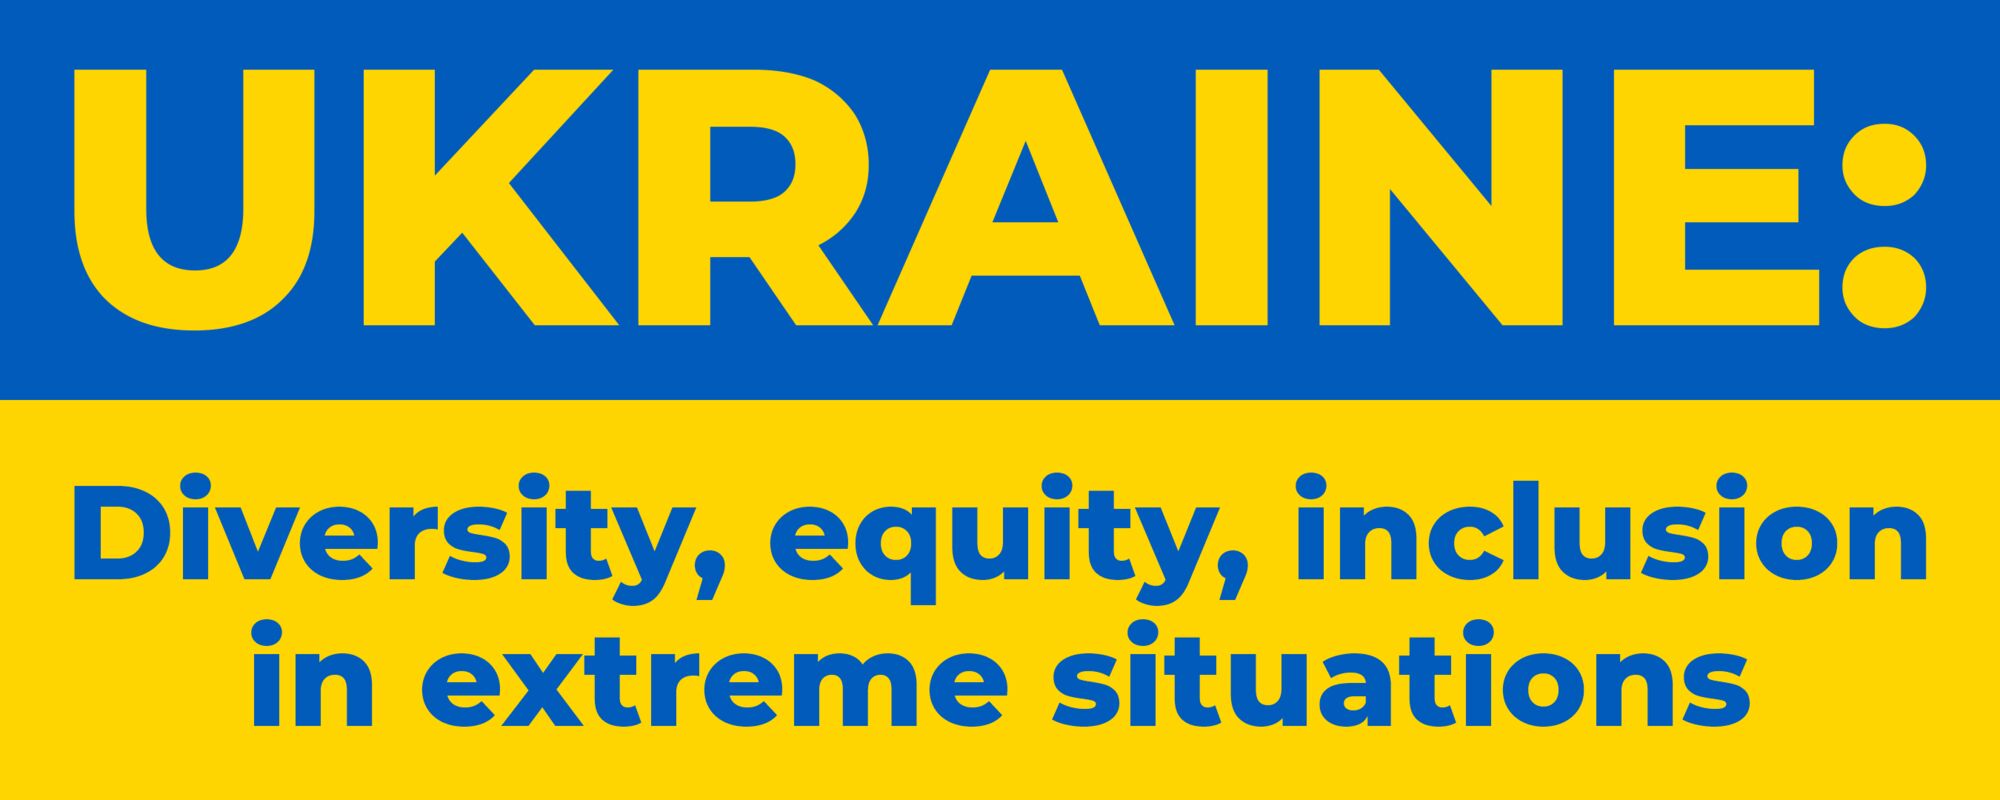 UKRAINE: DIVERSITY, EQUITY, INCLUSION IN EXTREME SITUATIONS — KOSTIANTYN GRIDIN